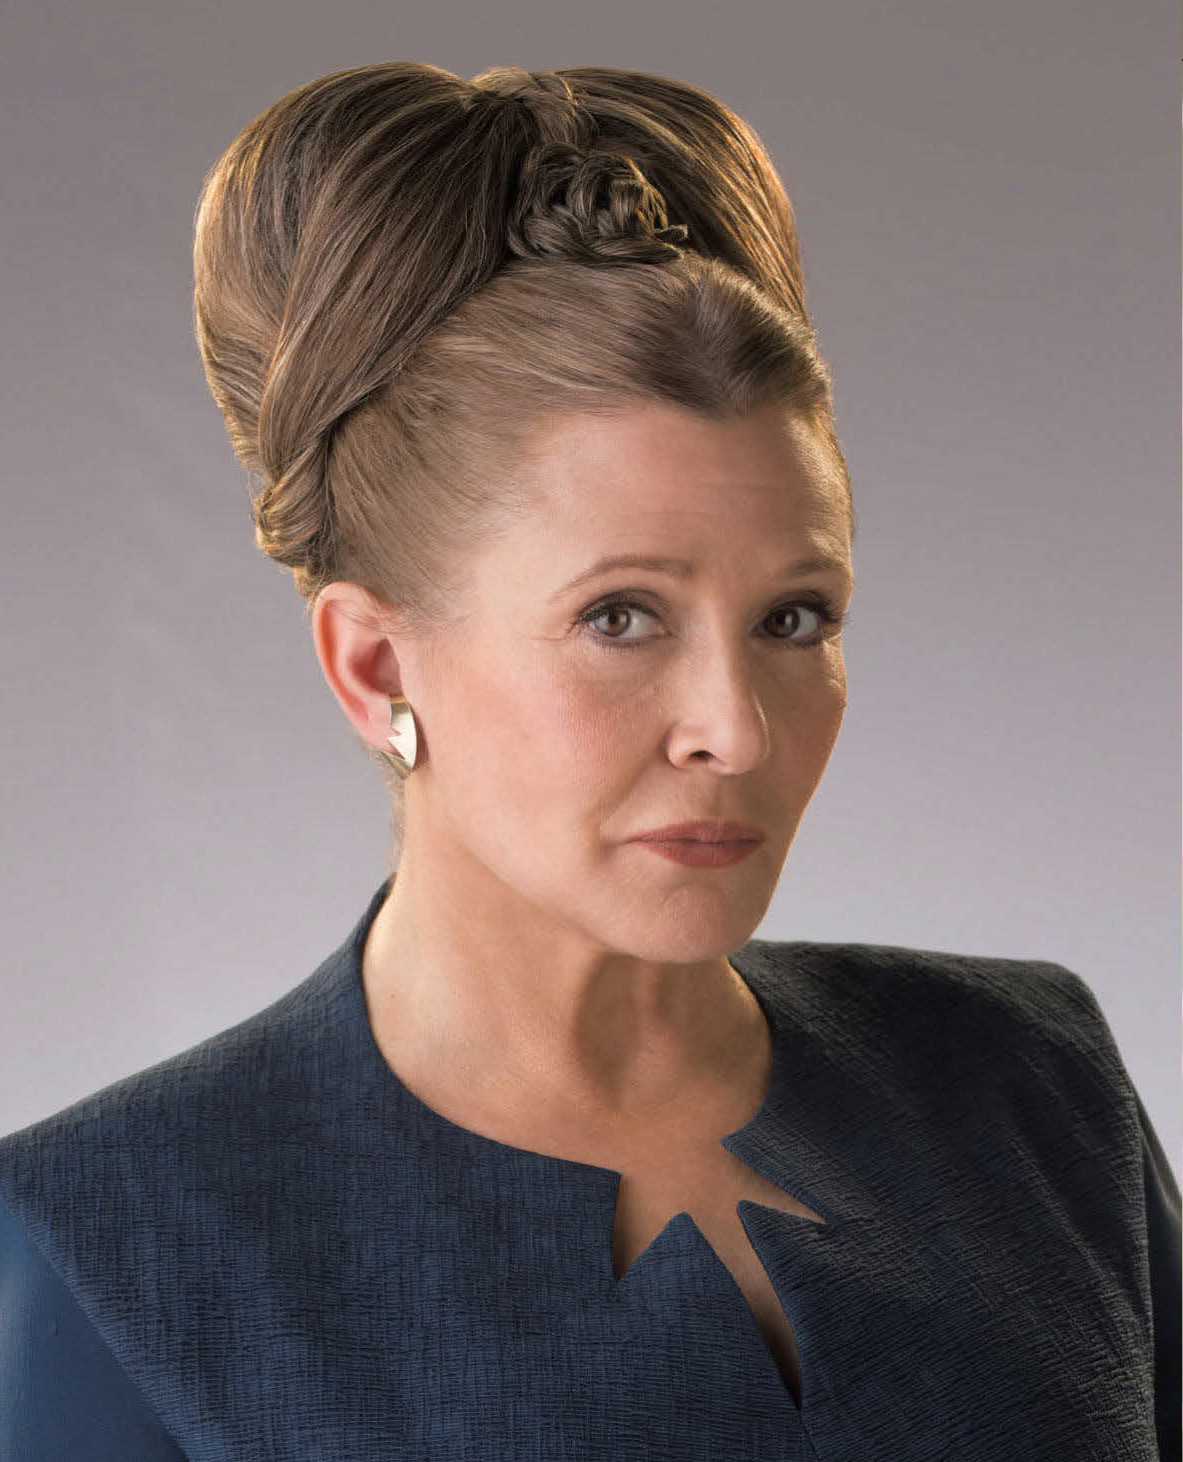 CARRIE FISHER IS PRINCESS LEIA 1